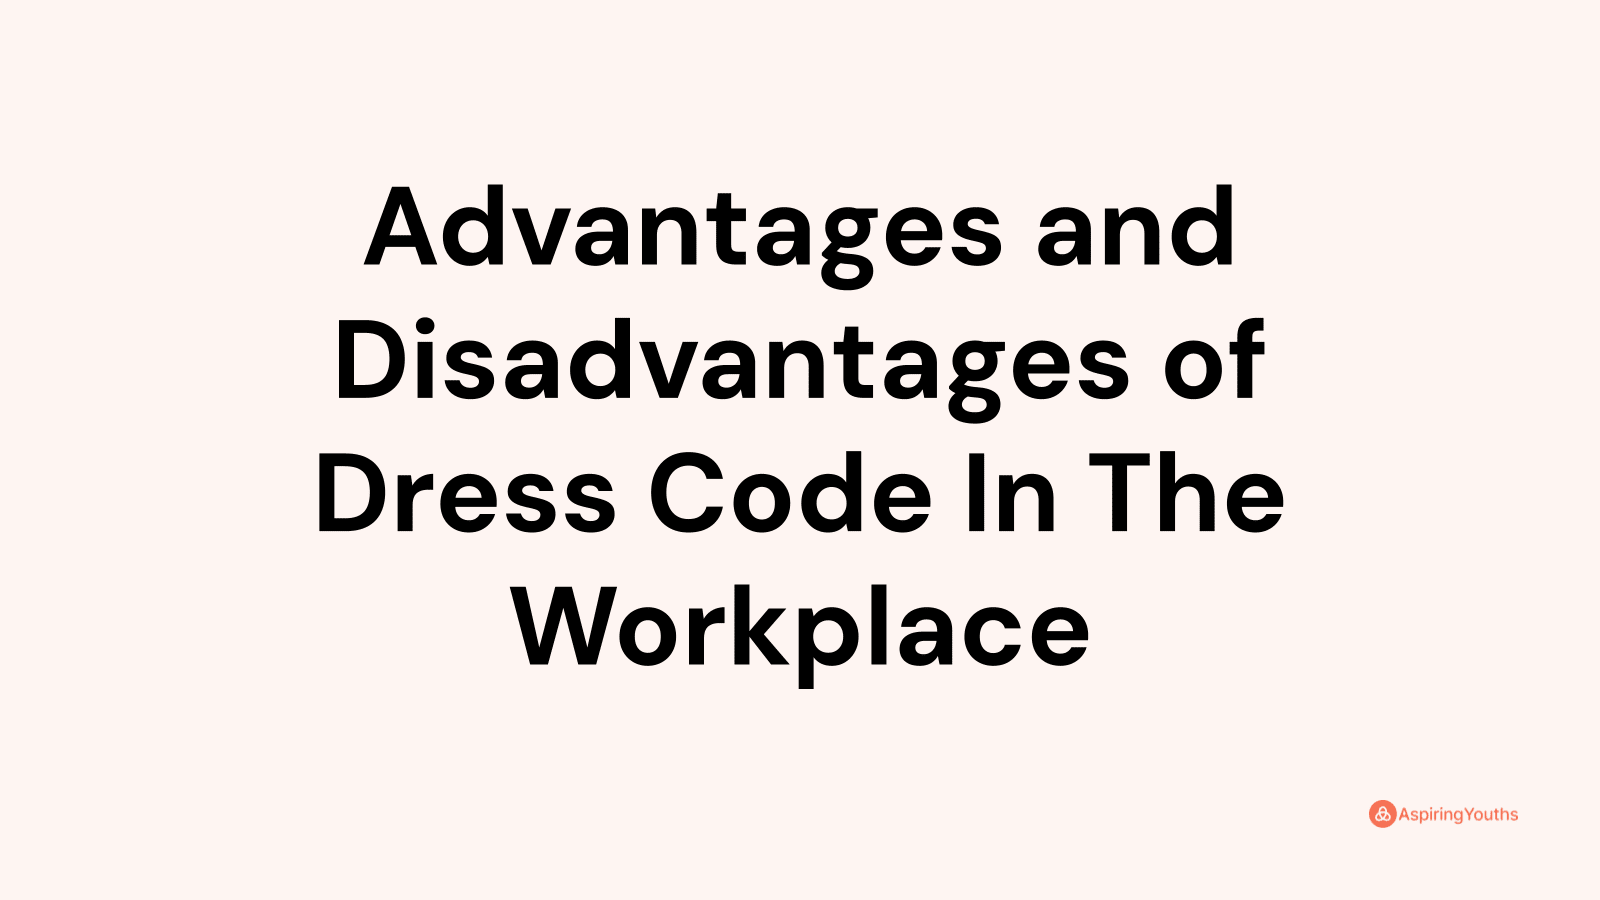 Advantages and disadvantages of Dress Code In The Workplace